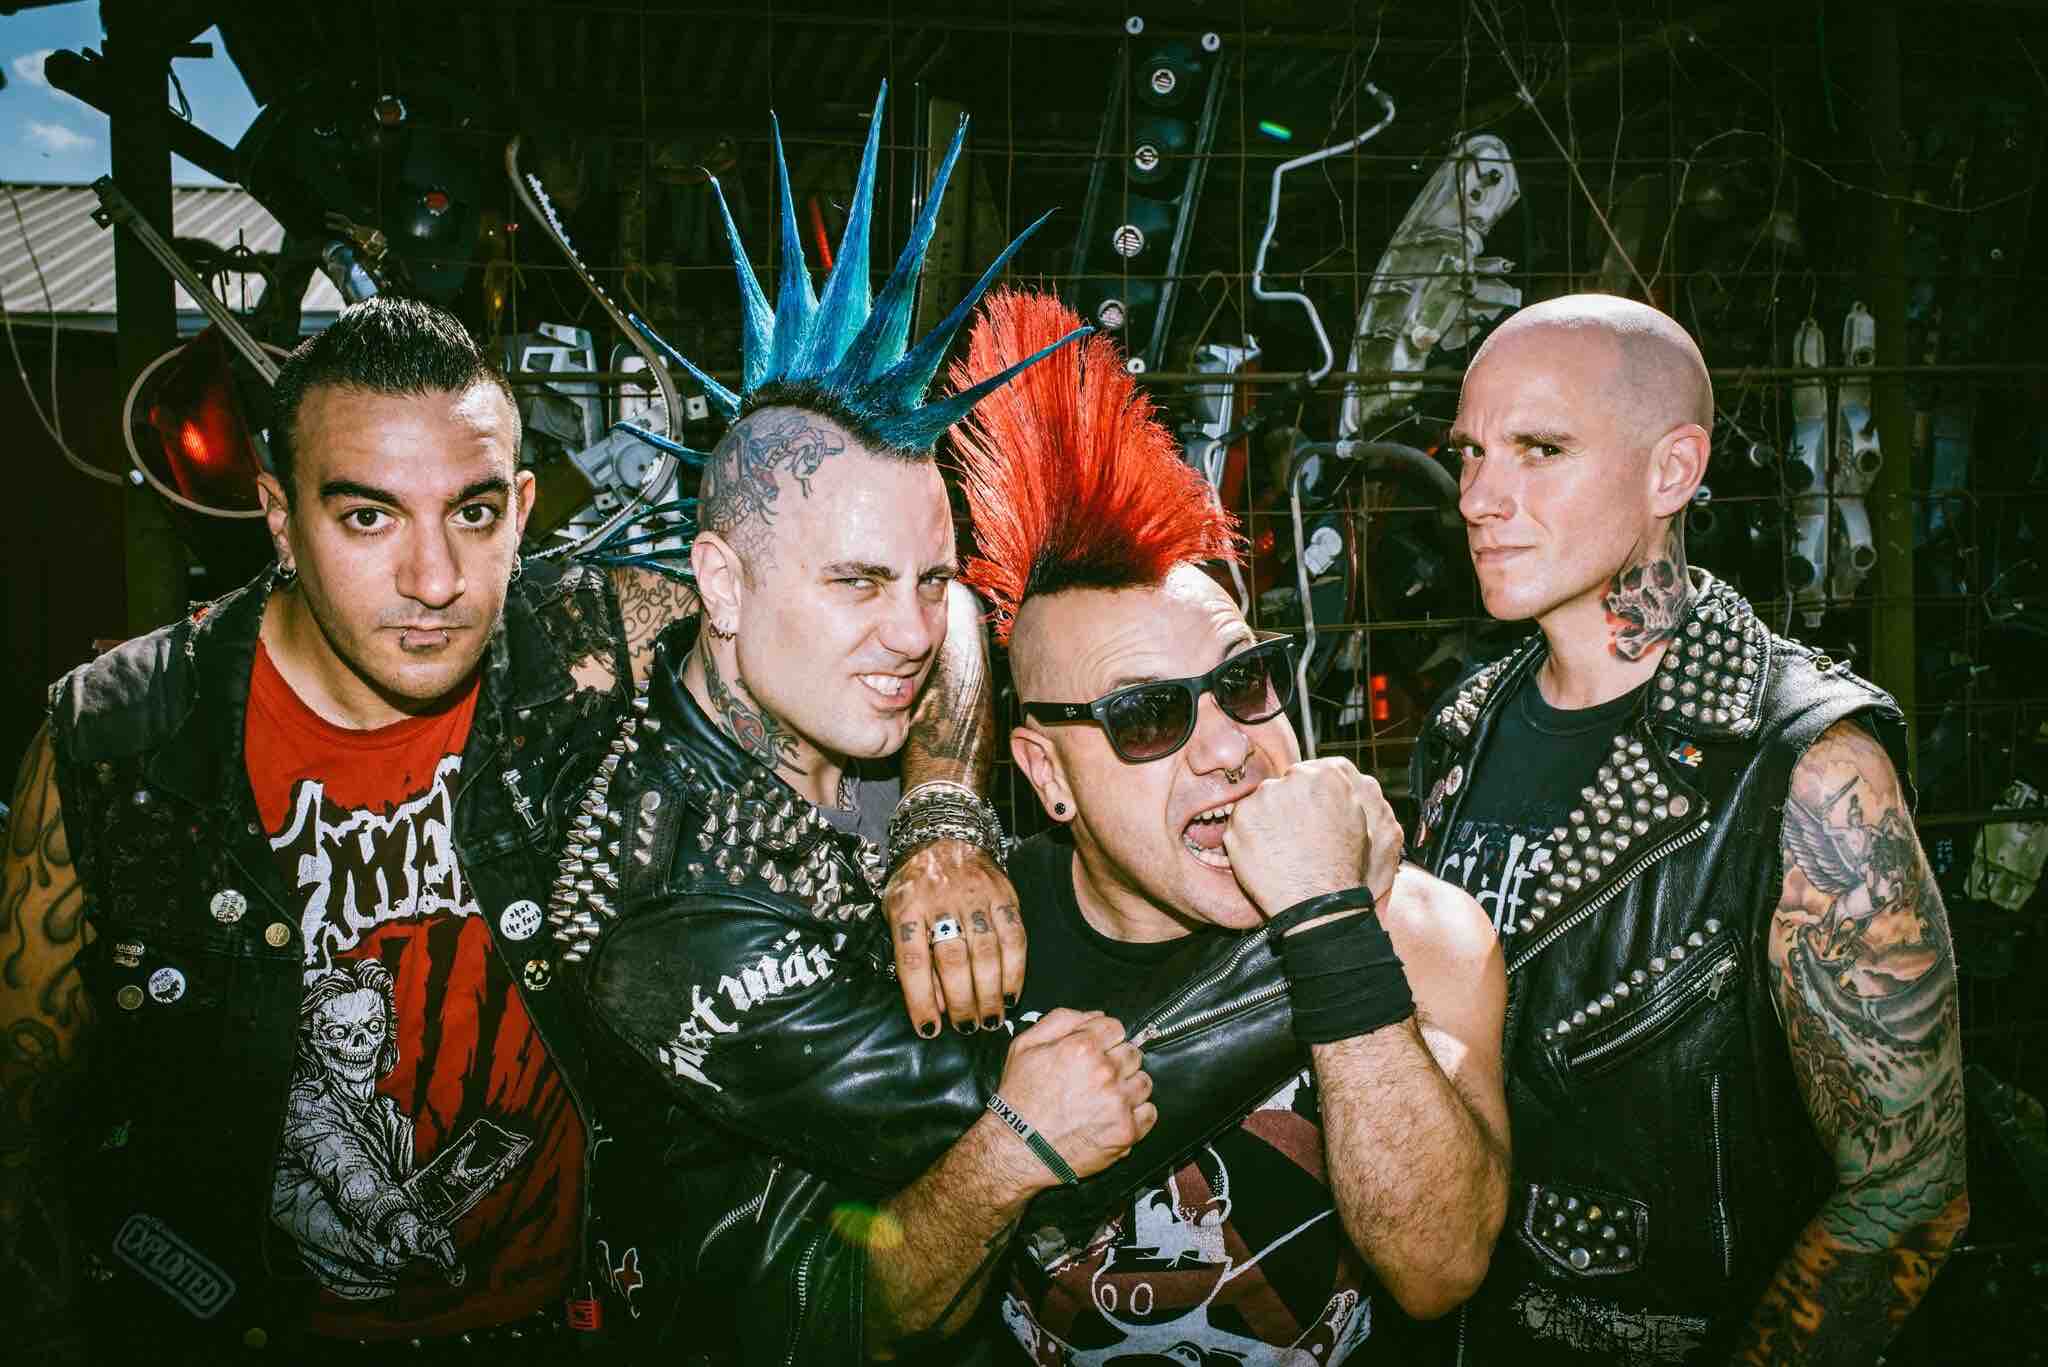 The Casualties and the trouble with punk rock as a defense